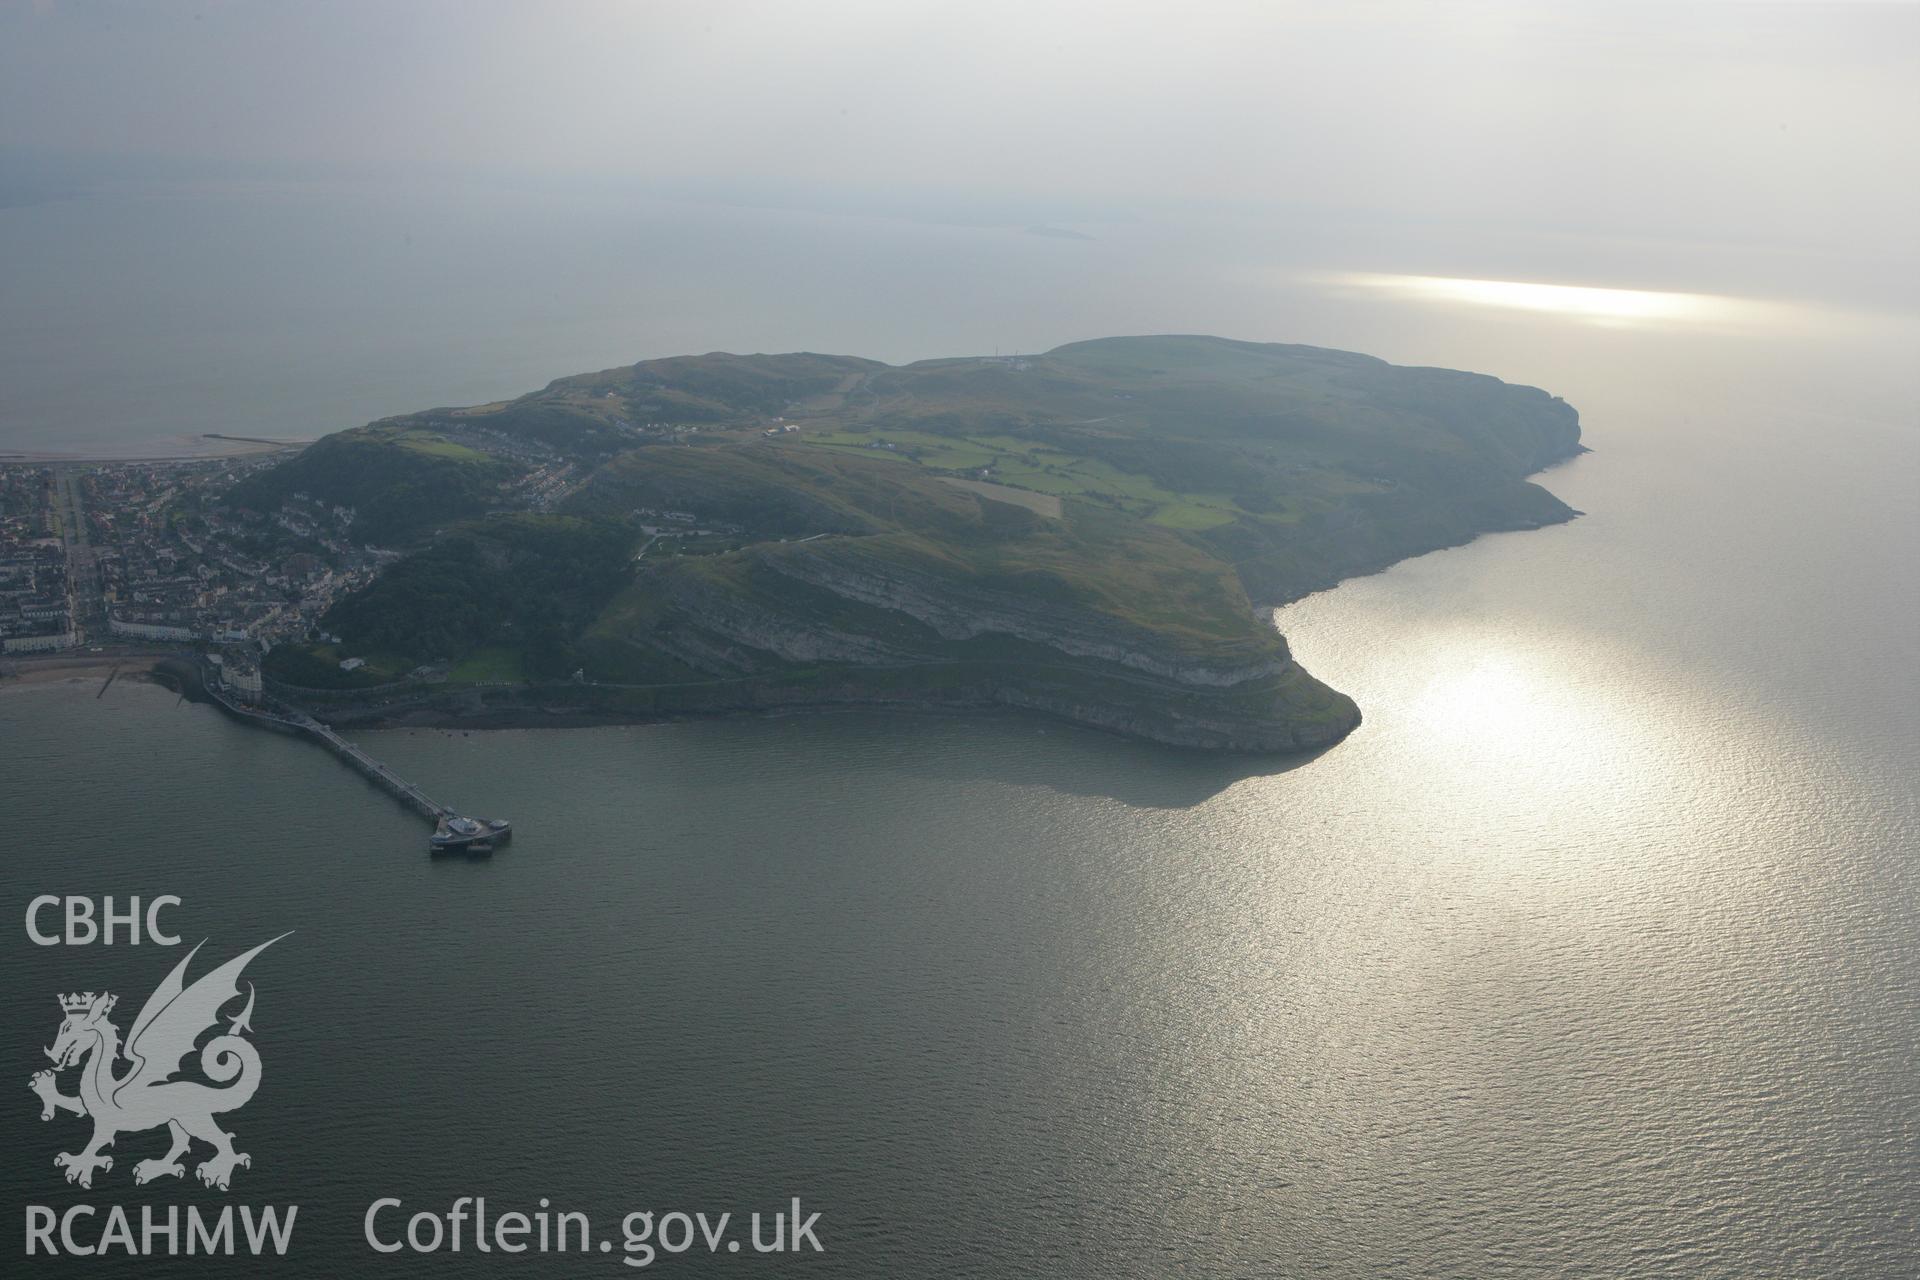 RCAHMW colour oblique photograph of Great Orme's Head, with Llandudno Pier, view from the east. Taken by Toby Driver on 24/07/2008.